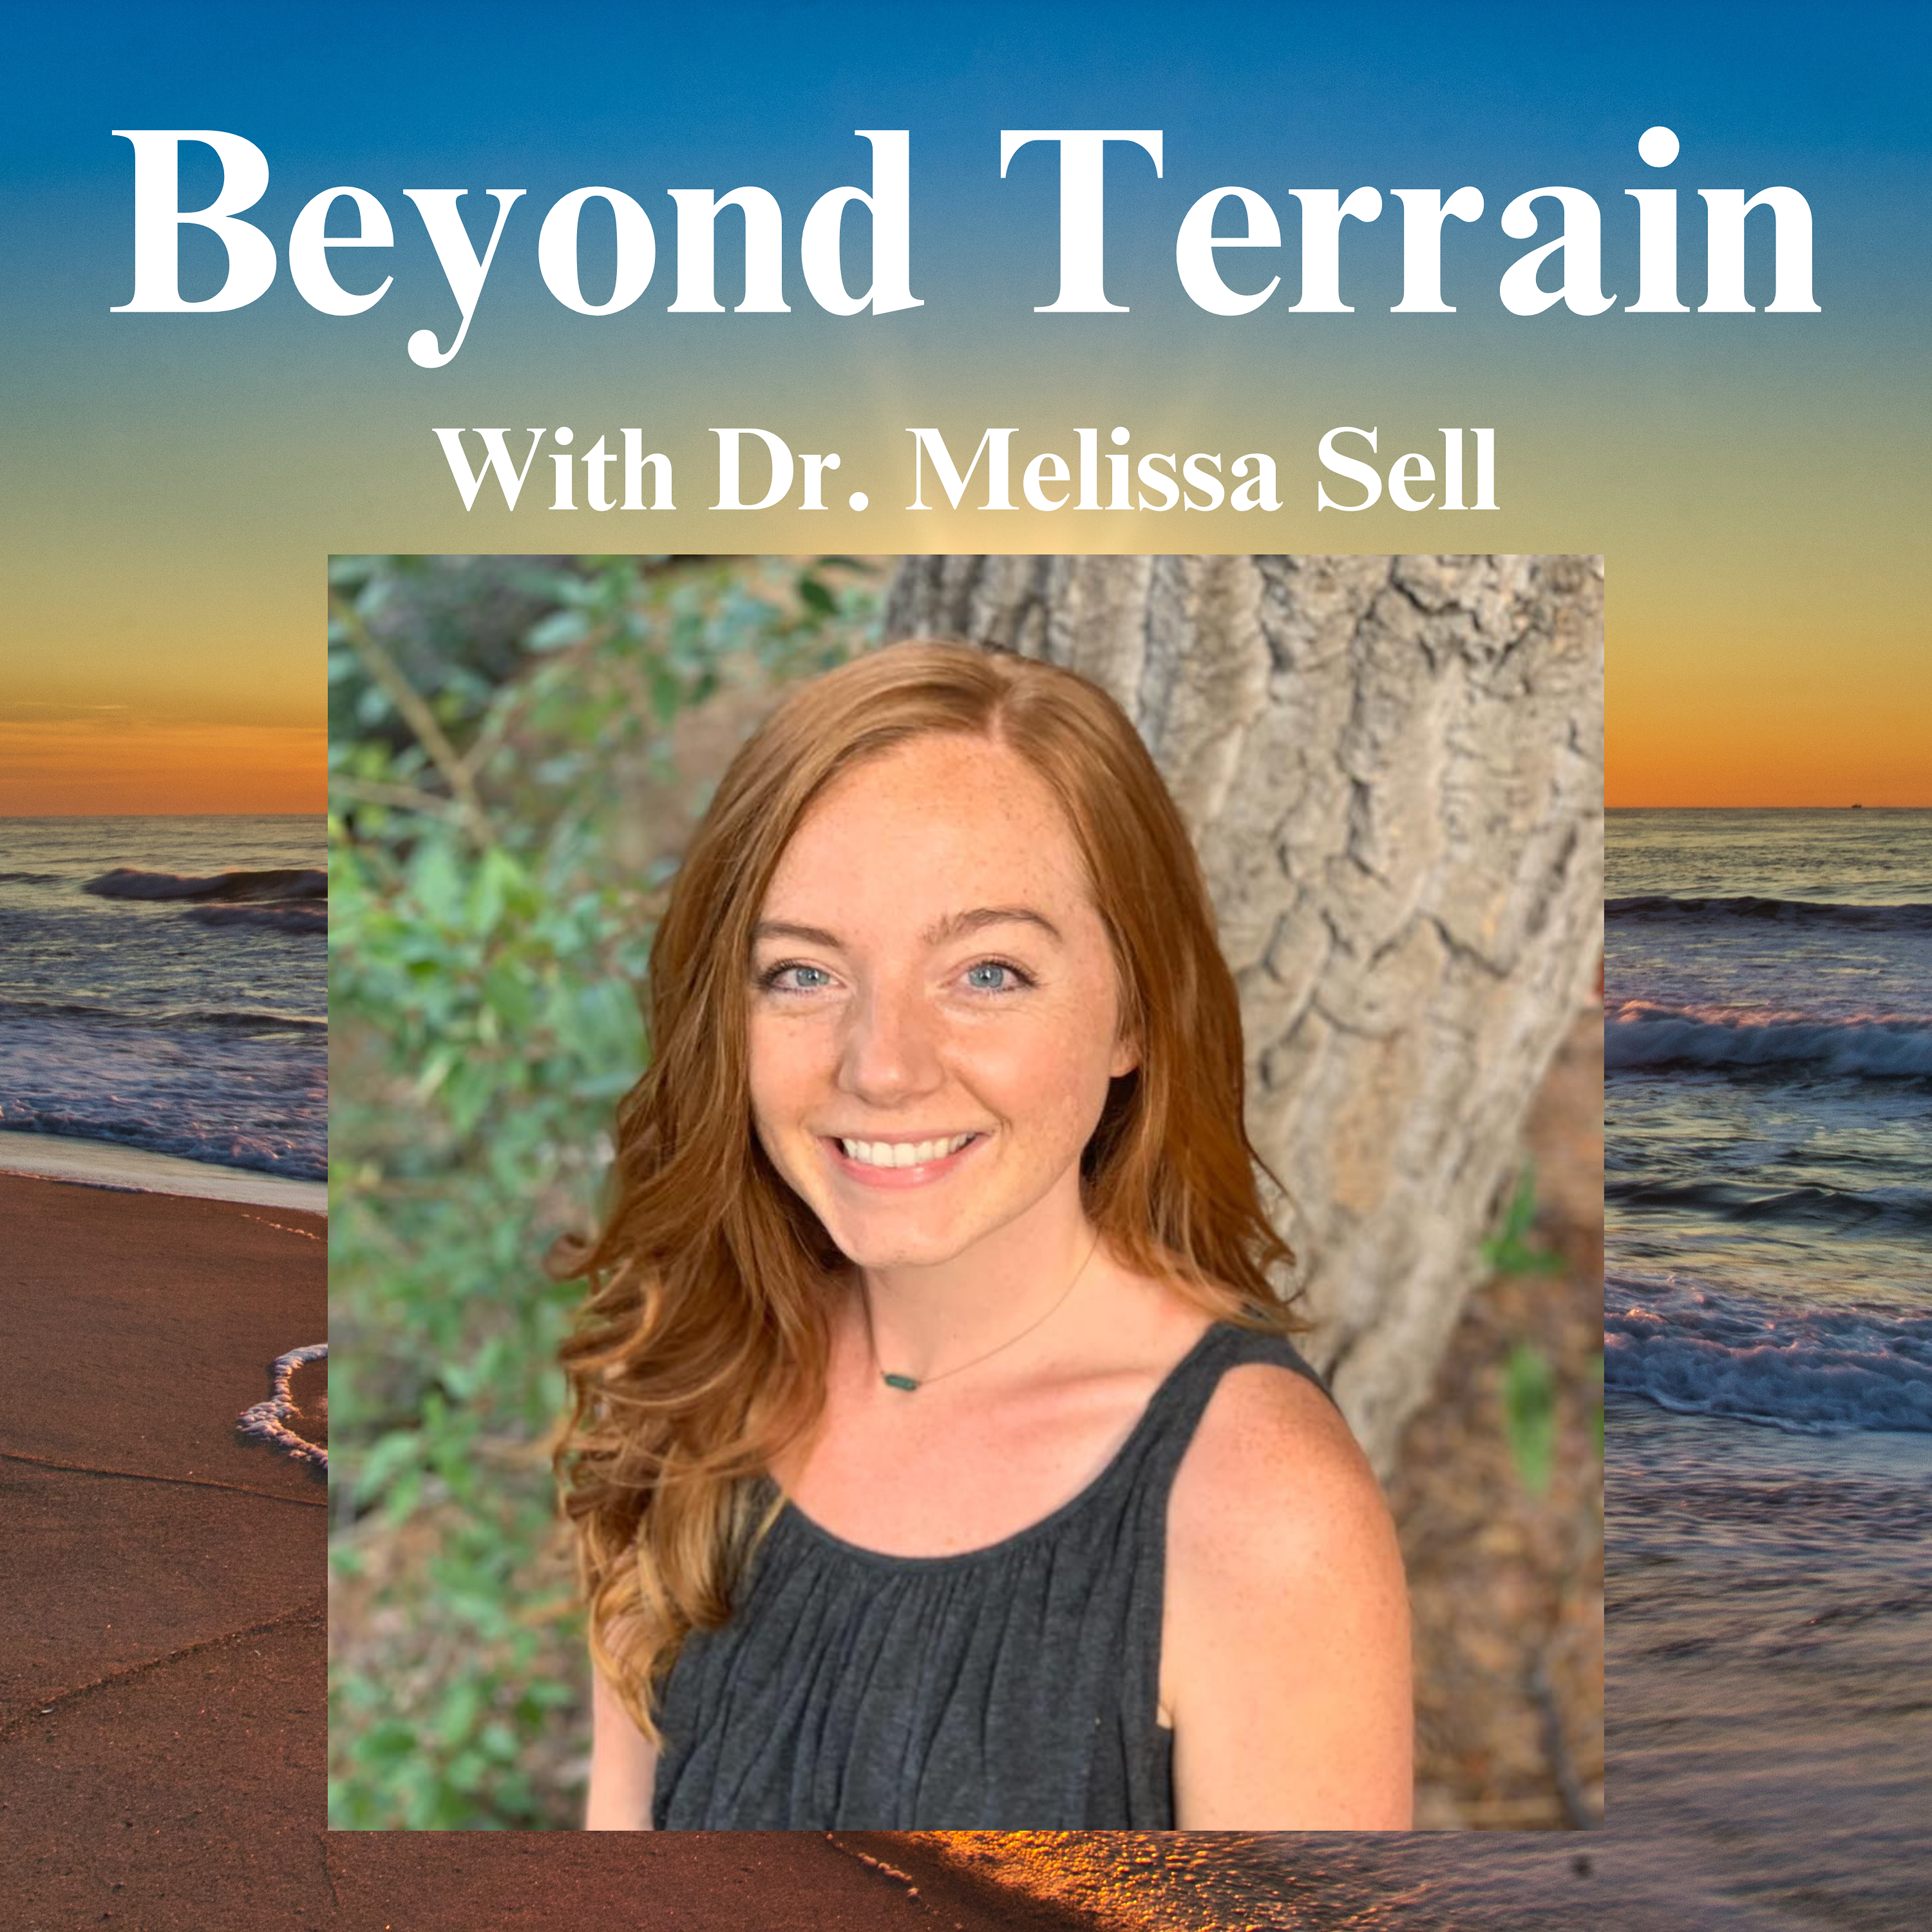 Dr. Melissa Sell on Germanic Medicine (GNM), Conflicts, Conflict Resolution, Biological Adaptation, and More!